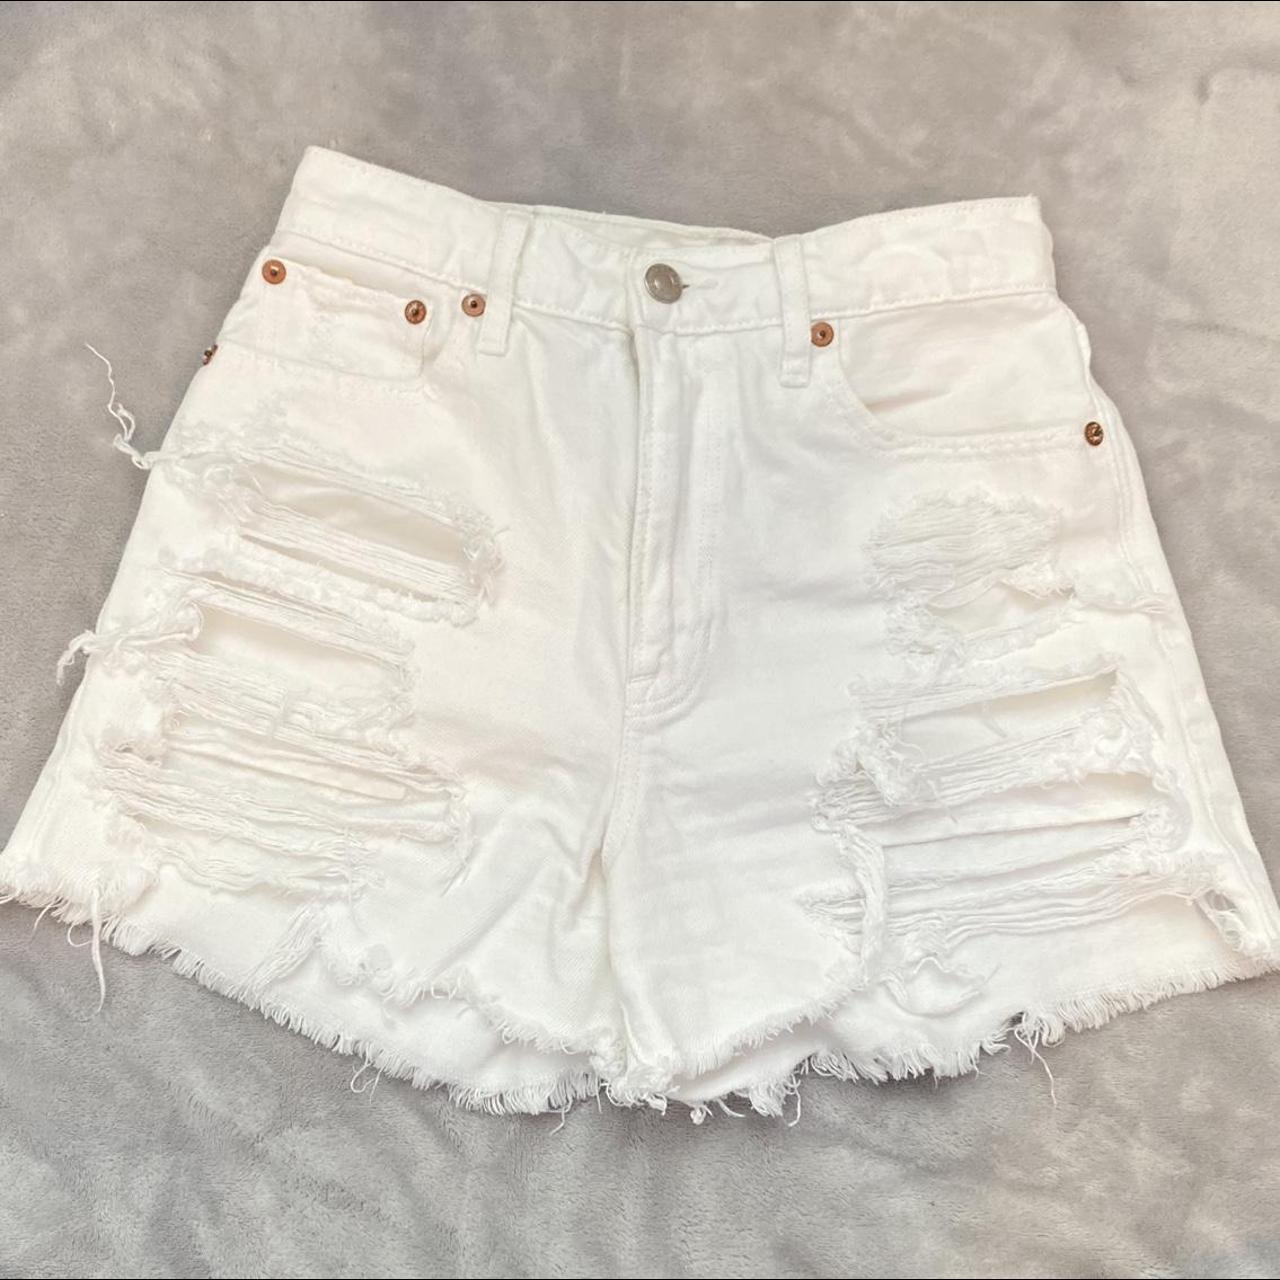 American Eagle Outfitters Women's White Shorts